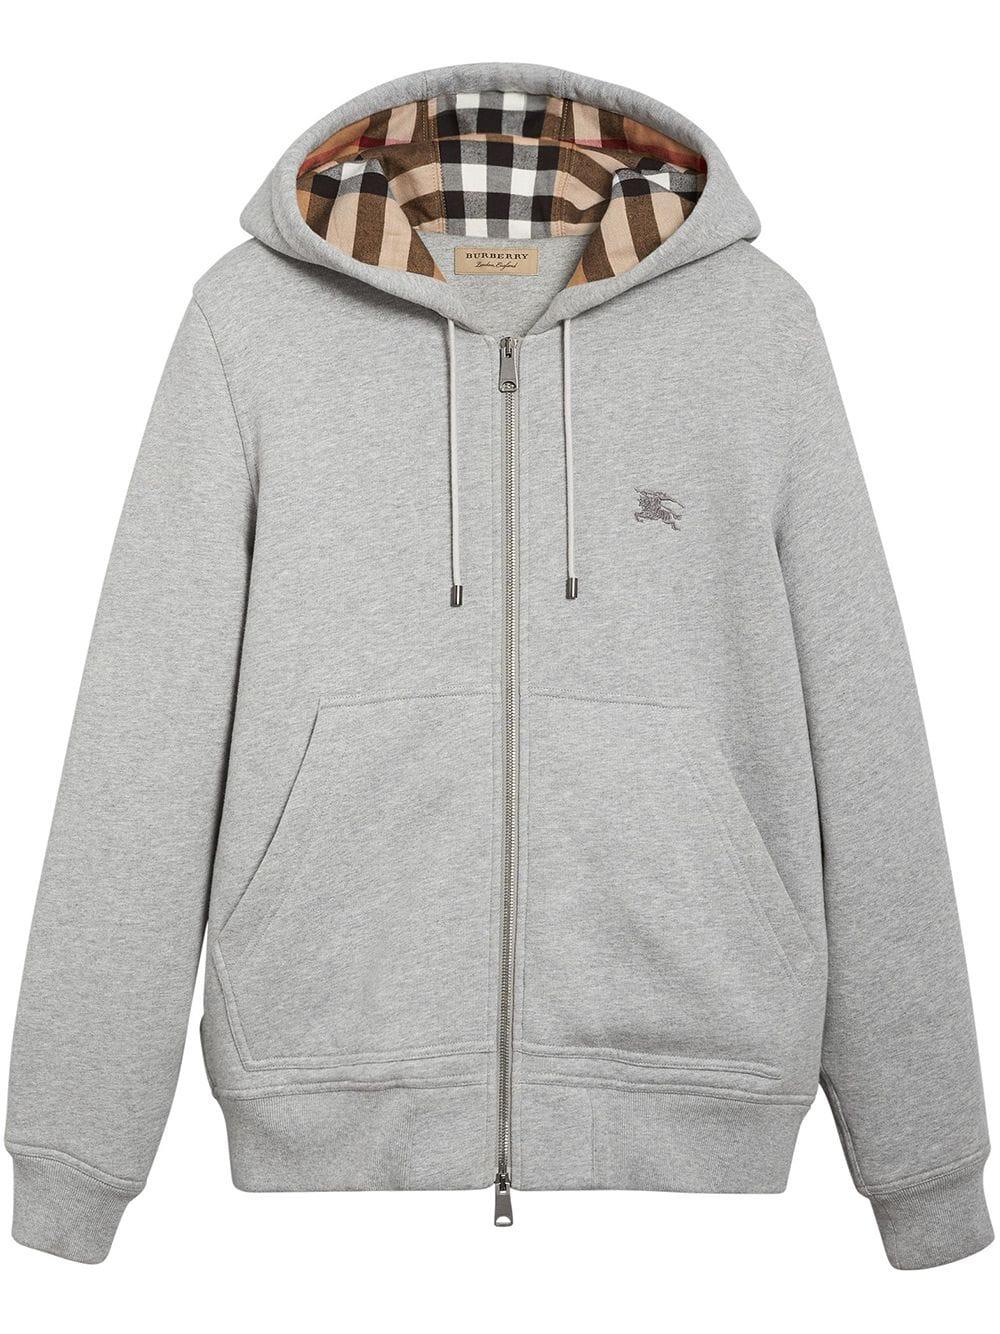 Burberry Cotton Check Detail Hooded Sweatshirt in Grey (Gray) for Men - Lyst